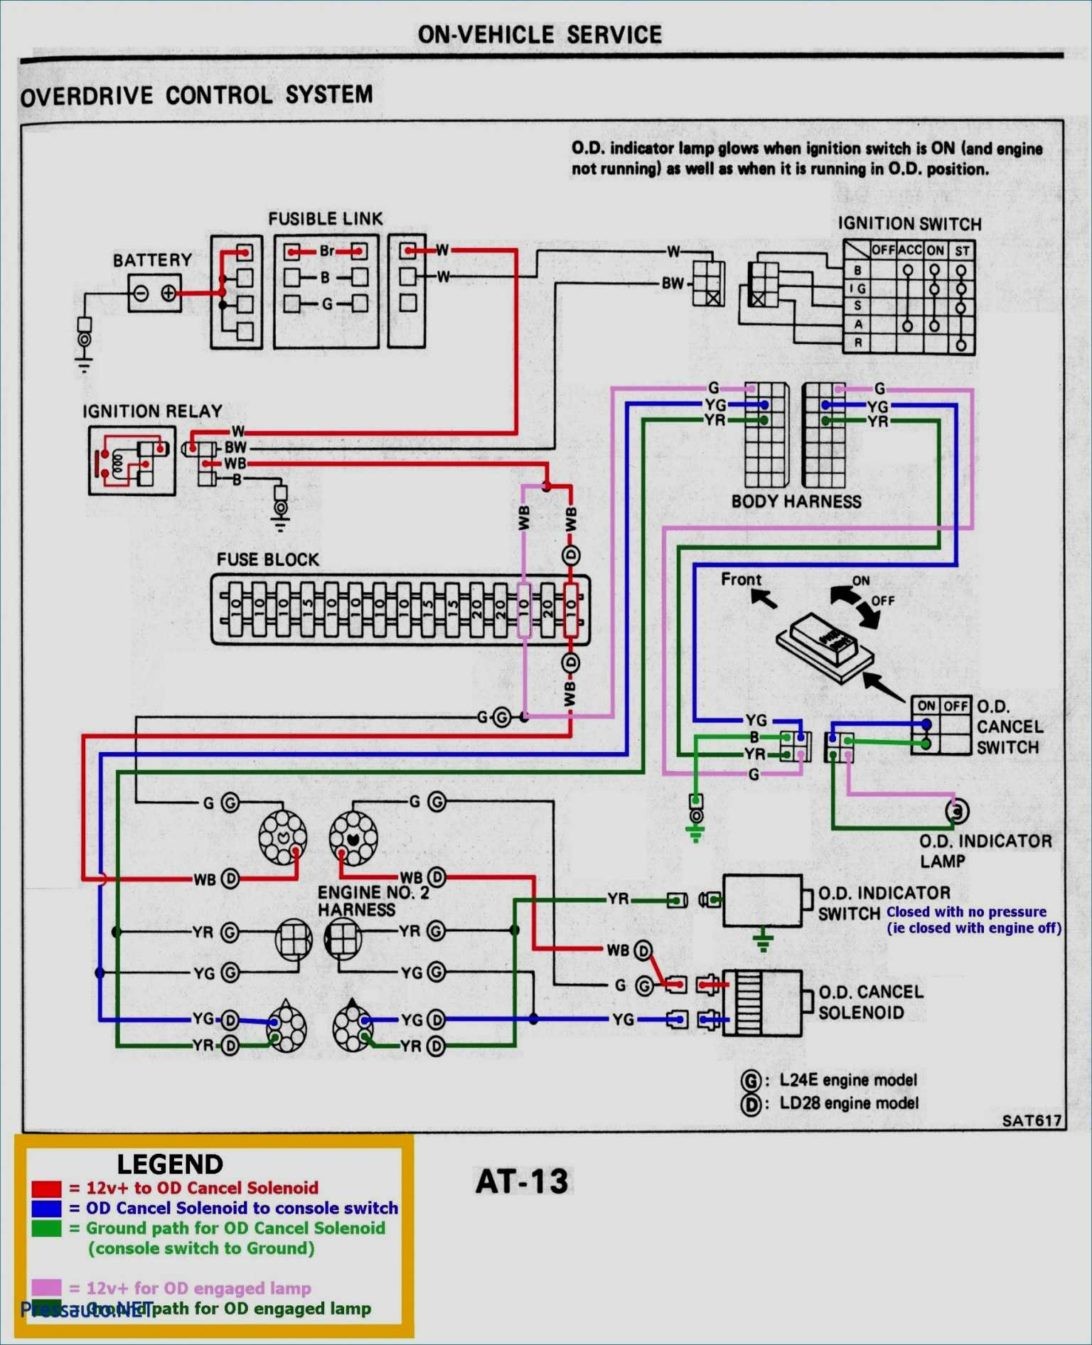 pioneer car stereo bluetooth toyota hilux stereo wiring diagram pioneer car stereo models panasonic sound bar bluetooth pairing not working 1092x1345